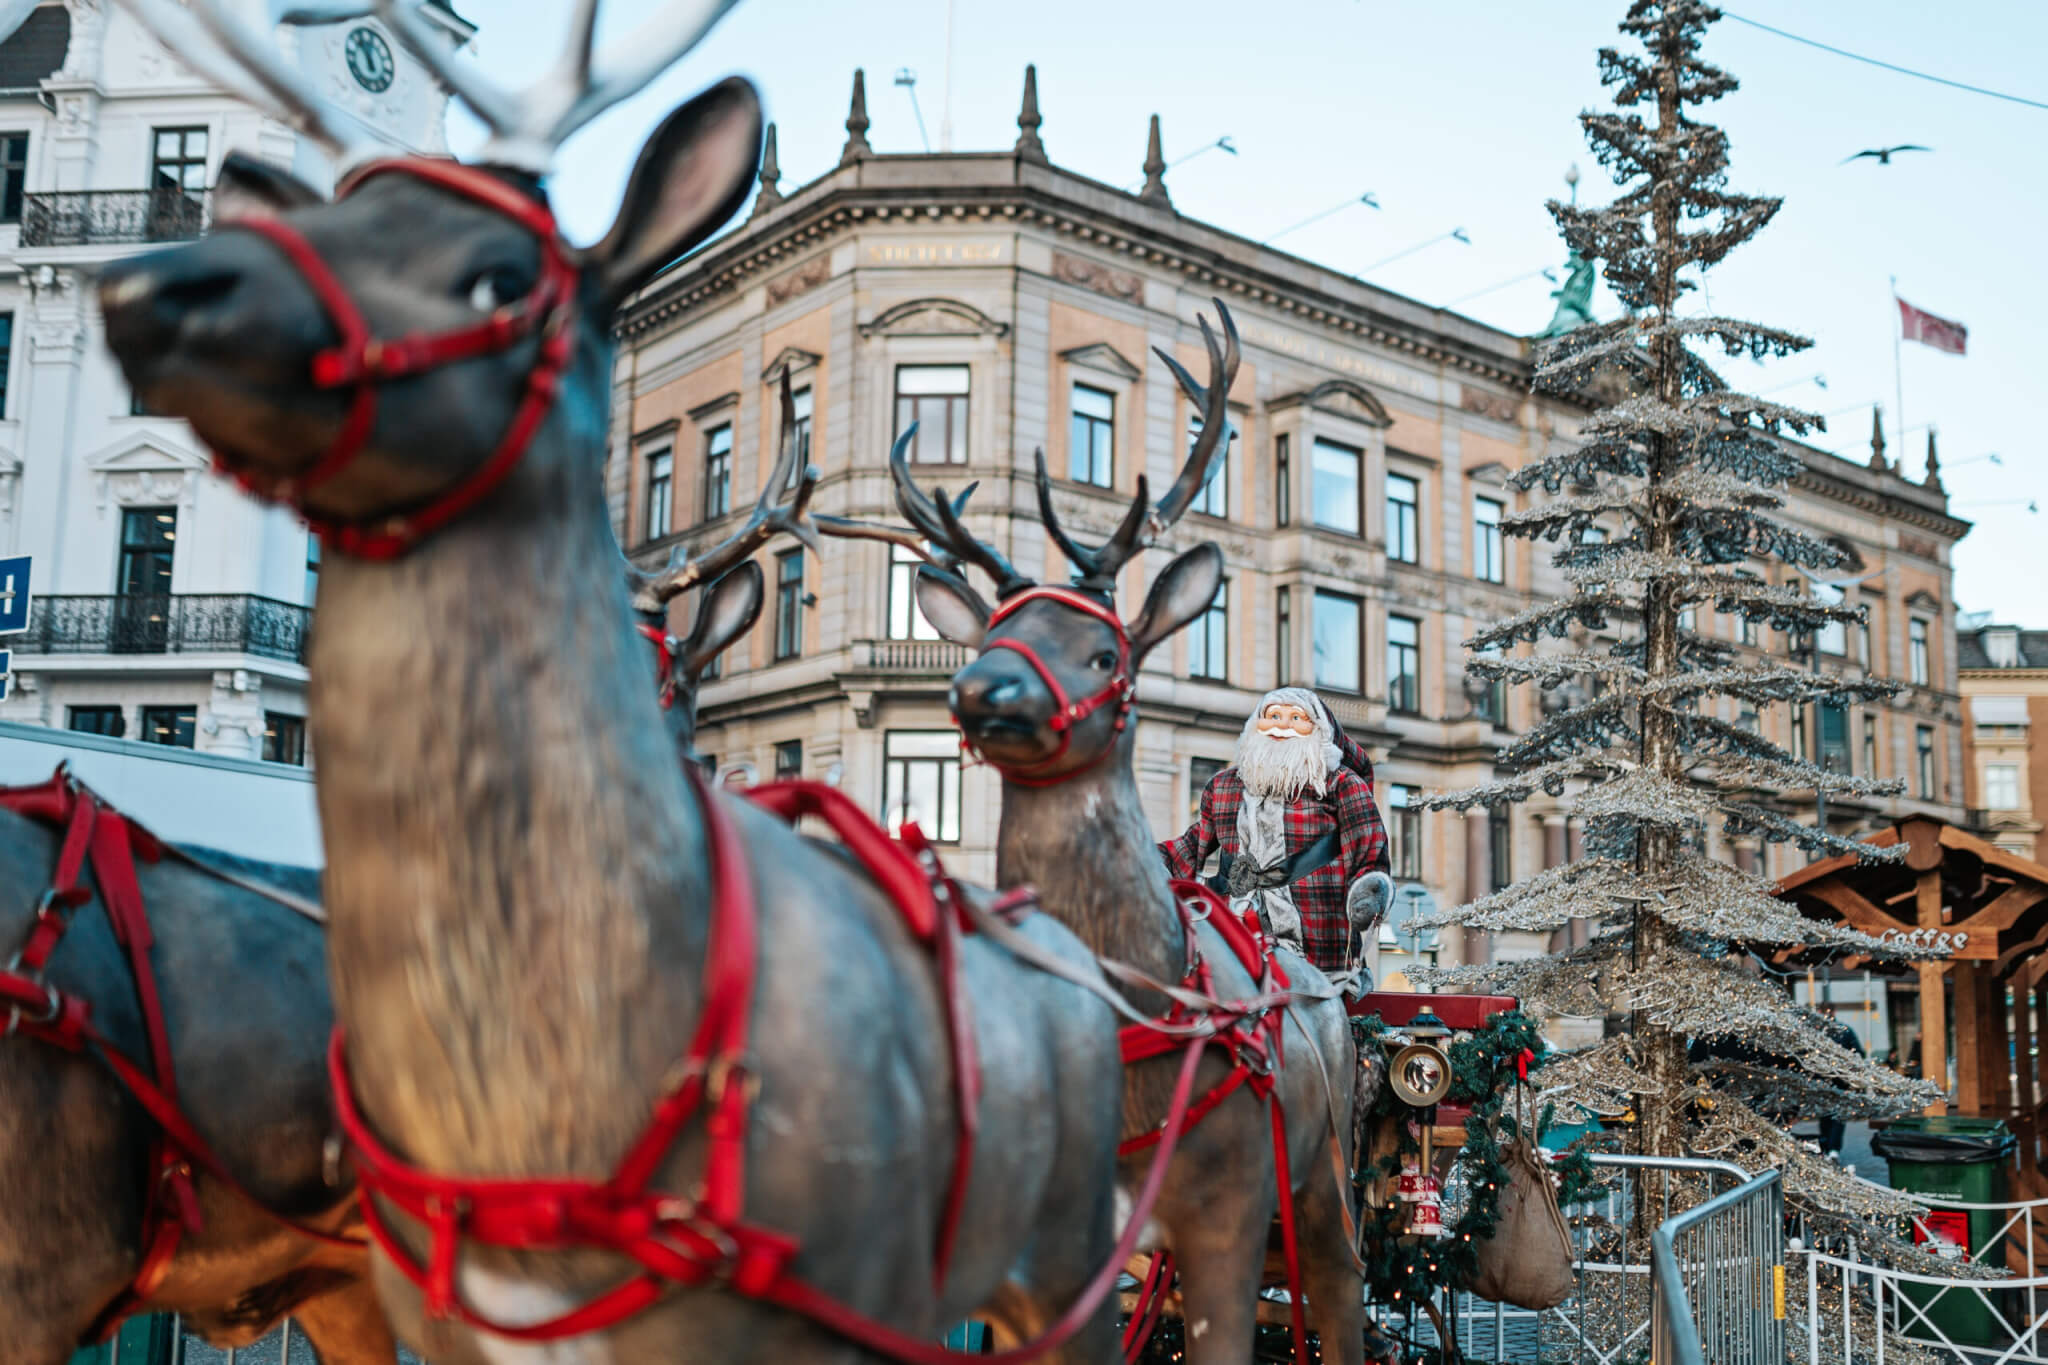 Reindeers with Santa claus at the Christmas market in central Copenhagen, Denmark